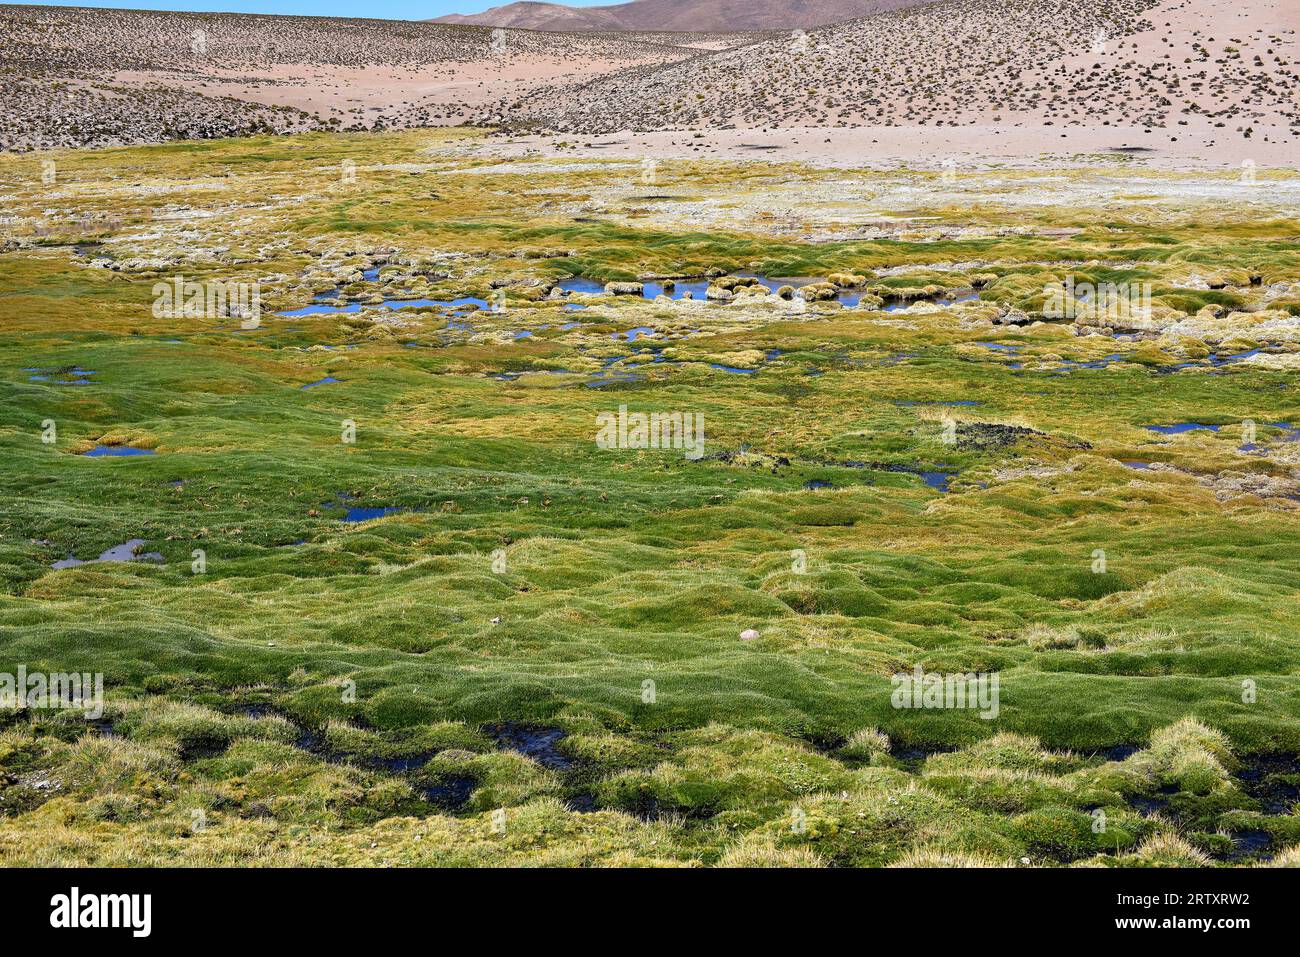 Bofedal (wetland) is a montane grassland whose dominant plant species are Distichia muscoides and Oxychloe andina (Juncaceae family). This photo was t Stock Photo